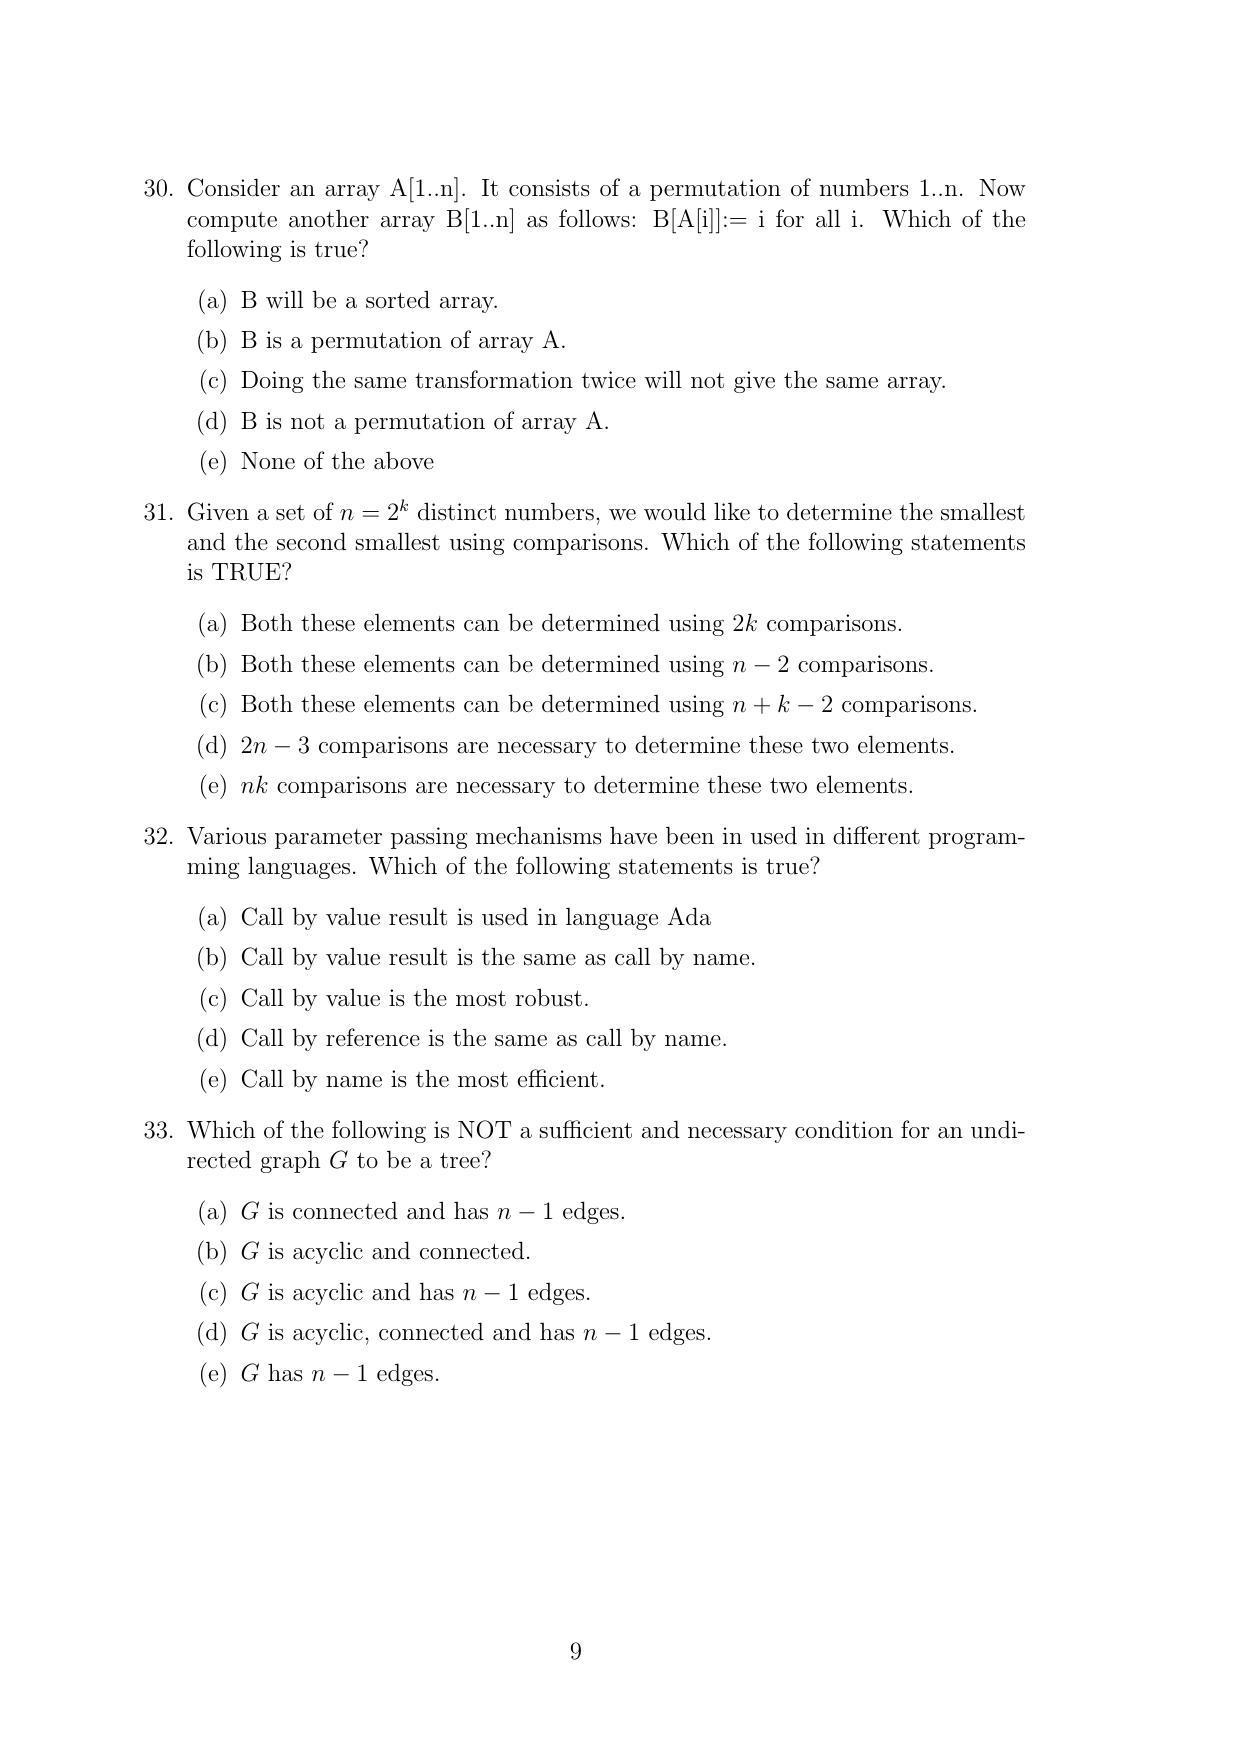 TIFR GS 2011 Computer & Systems Sciences Question Paper - Page 9